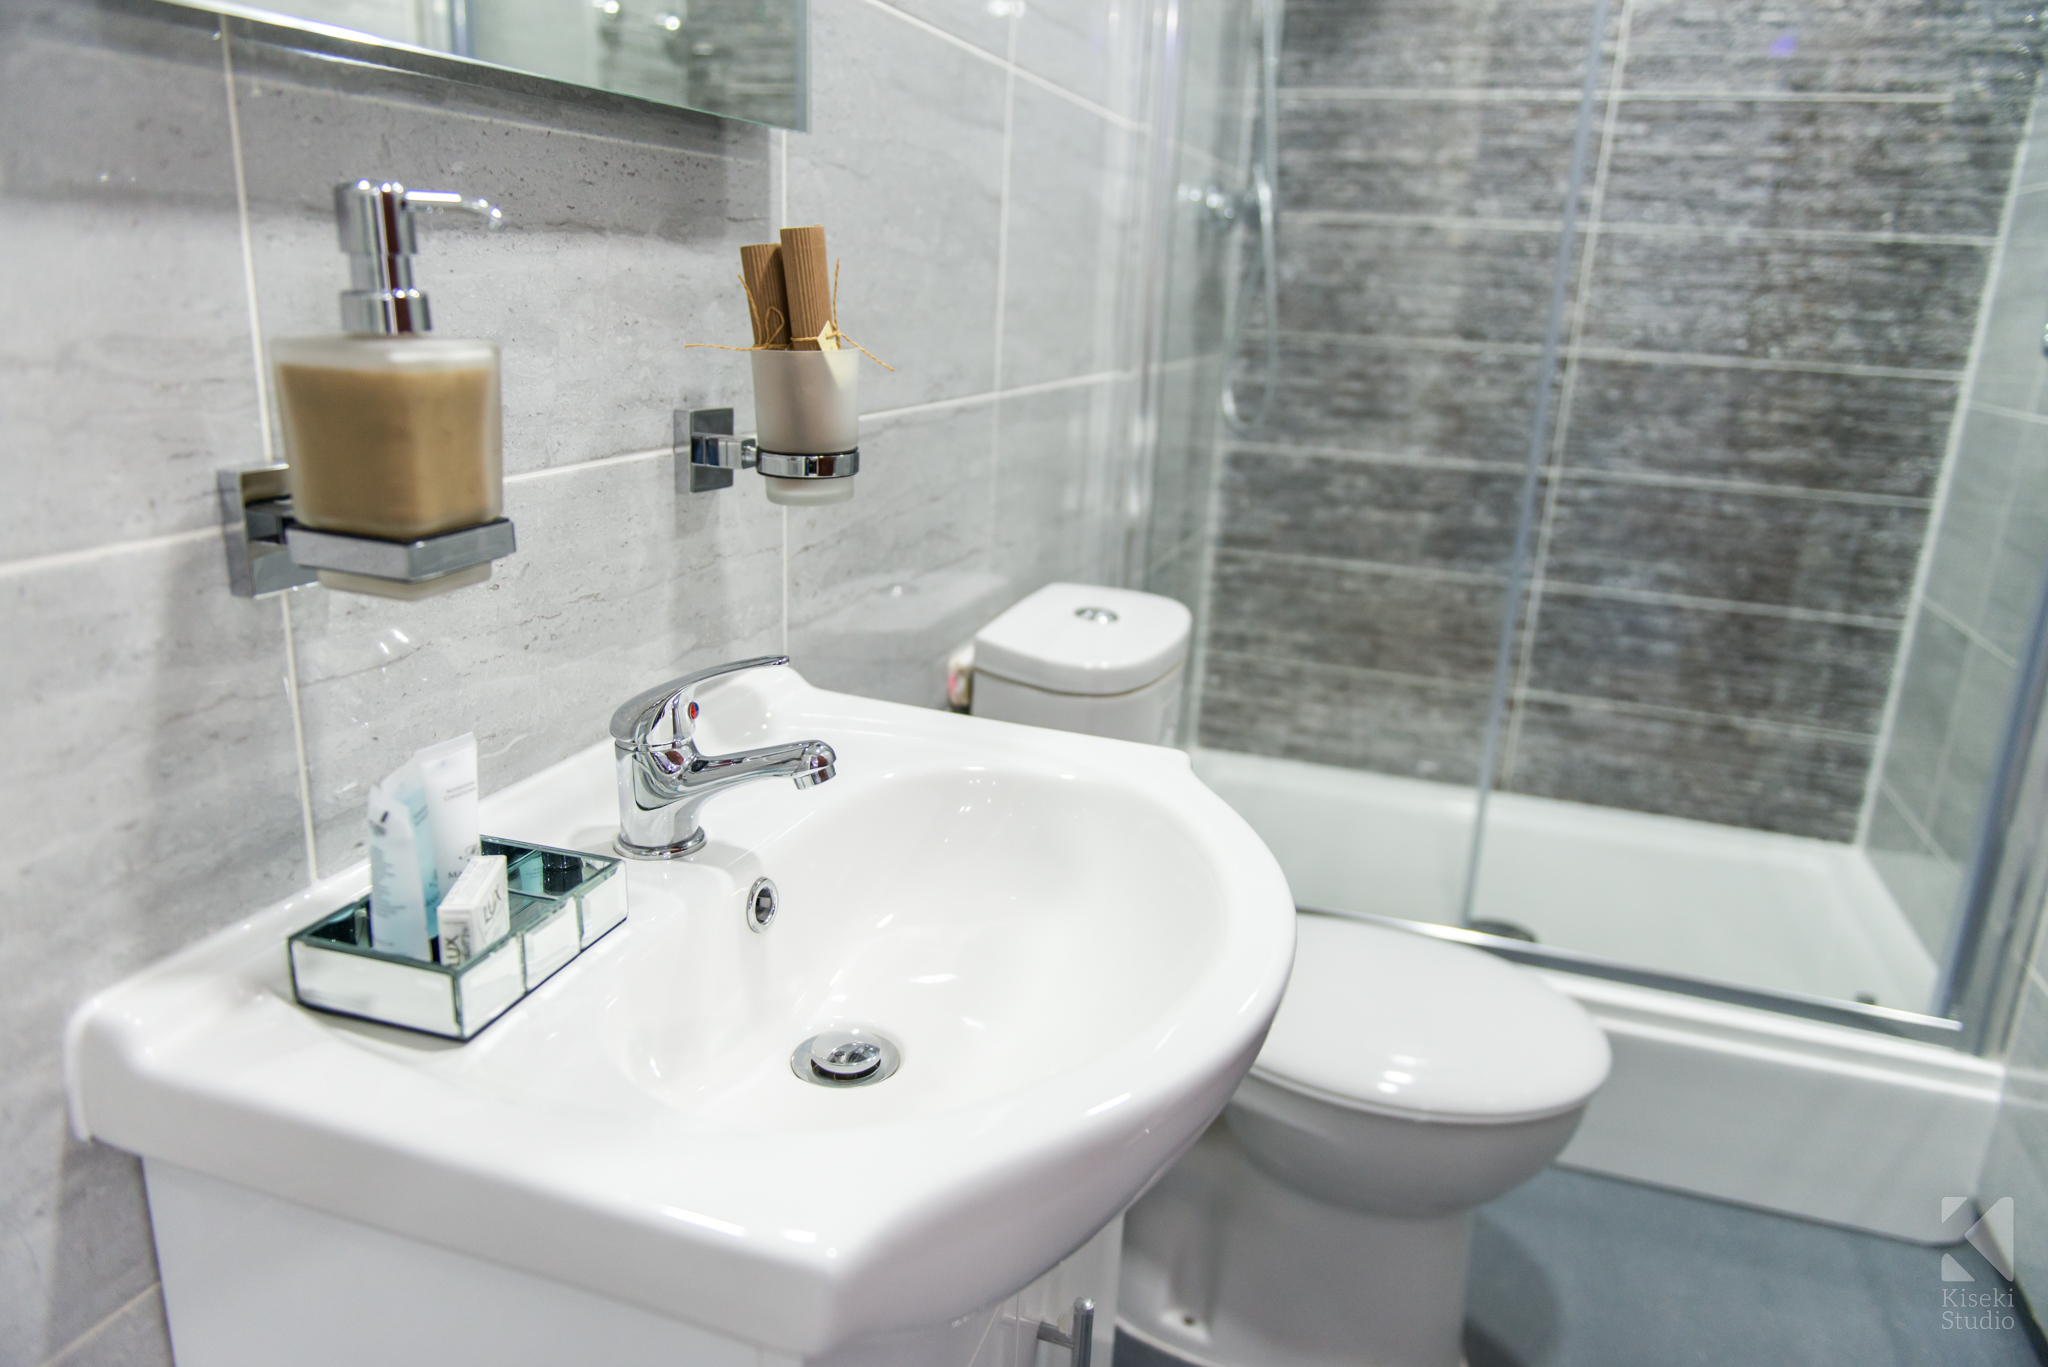 meridian-apartments-bradford-commerical-professional-photography-building-rental-serviced-bathroom